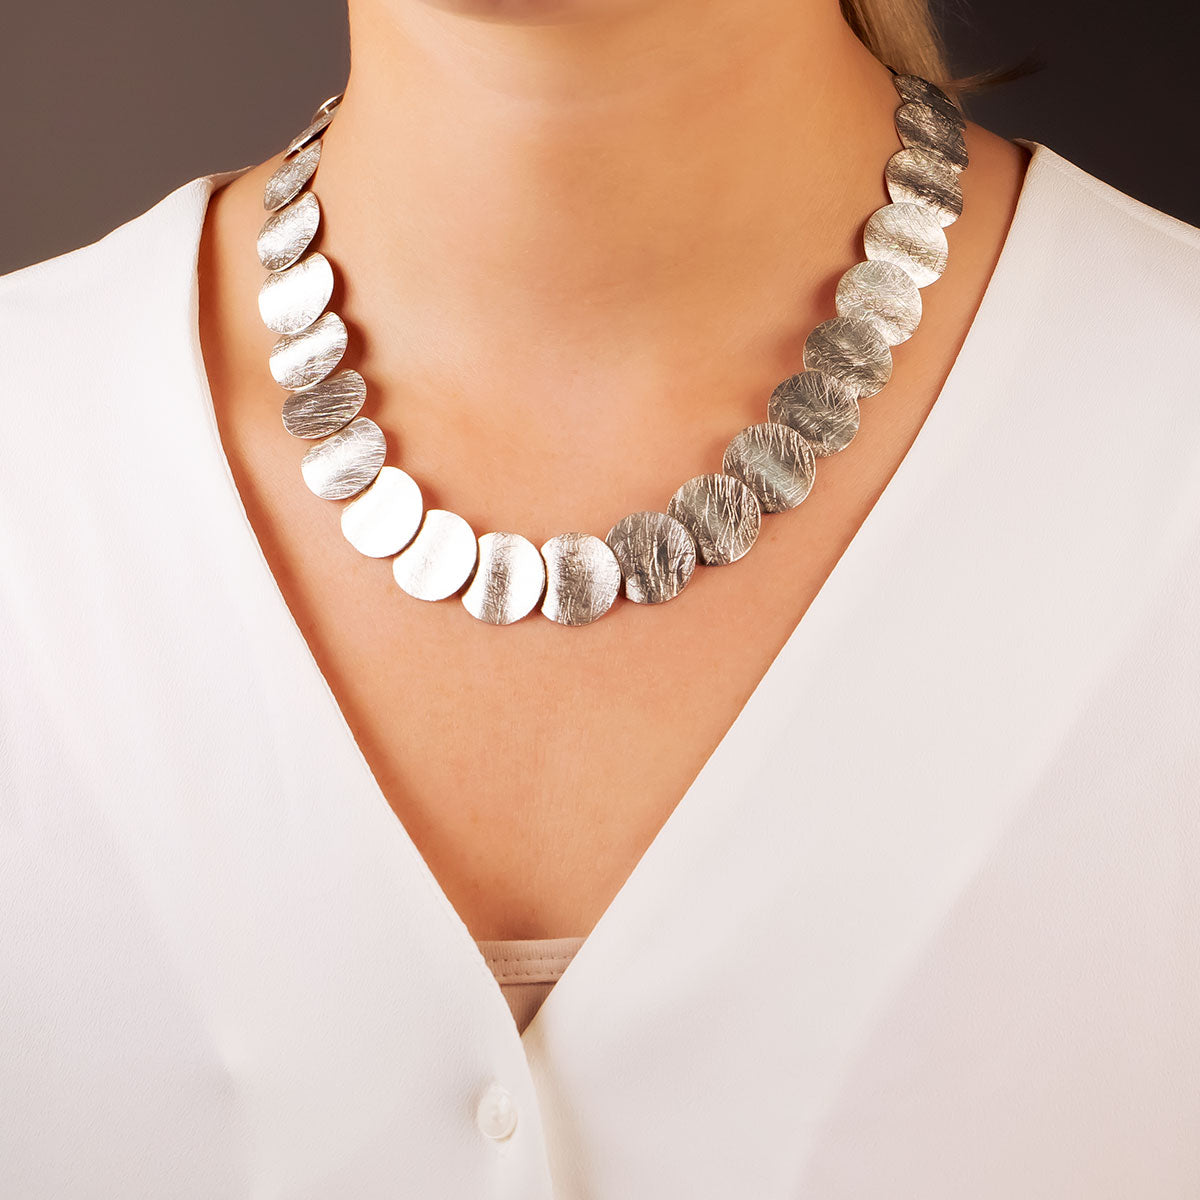 Overlapping Discs Necklace